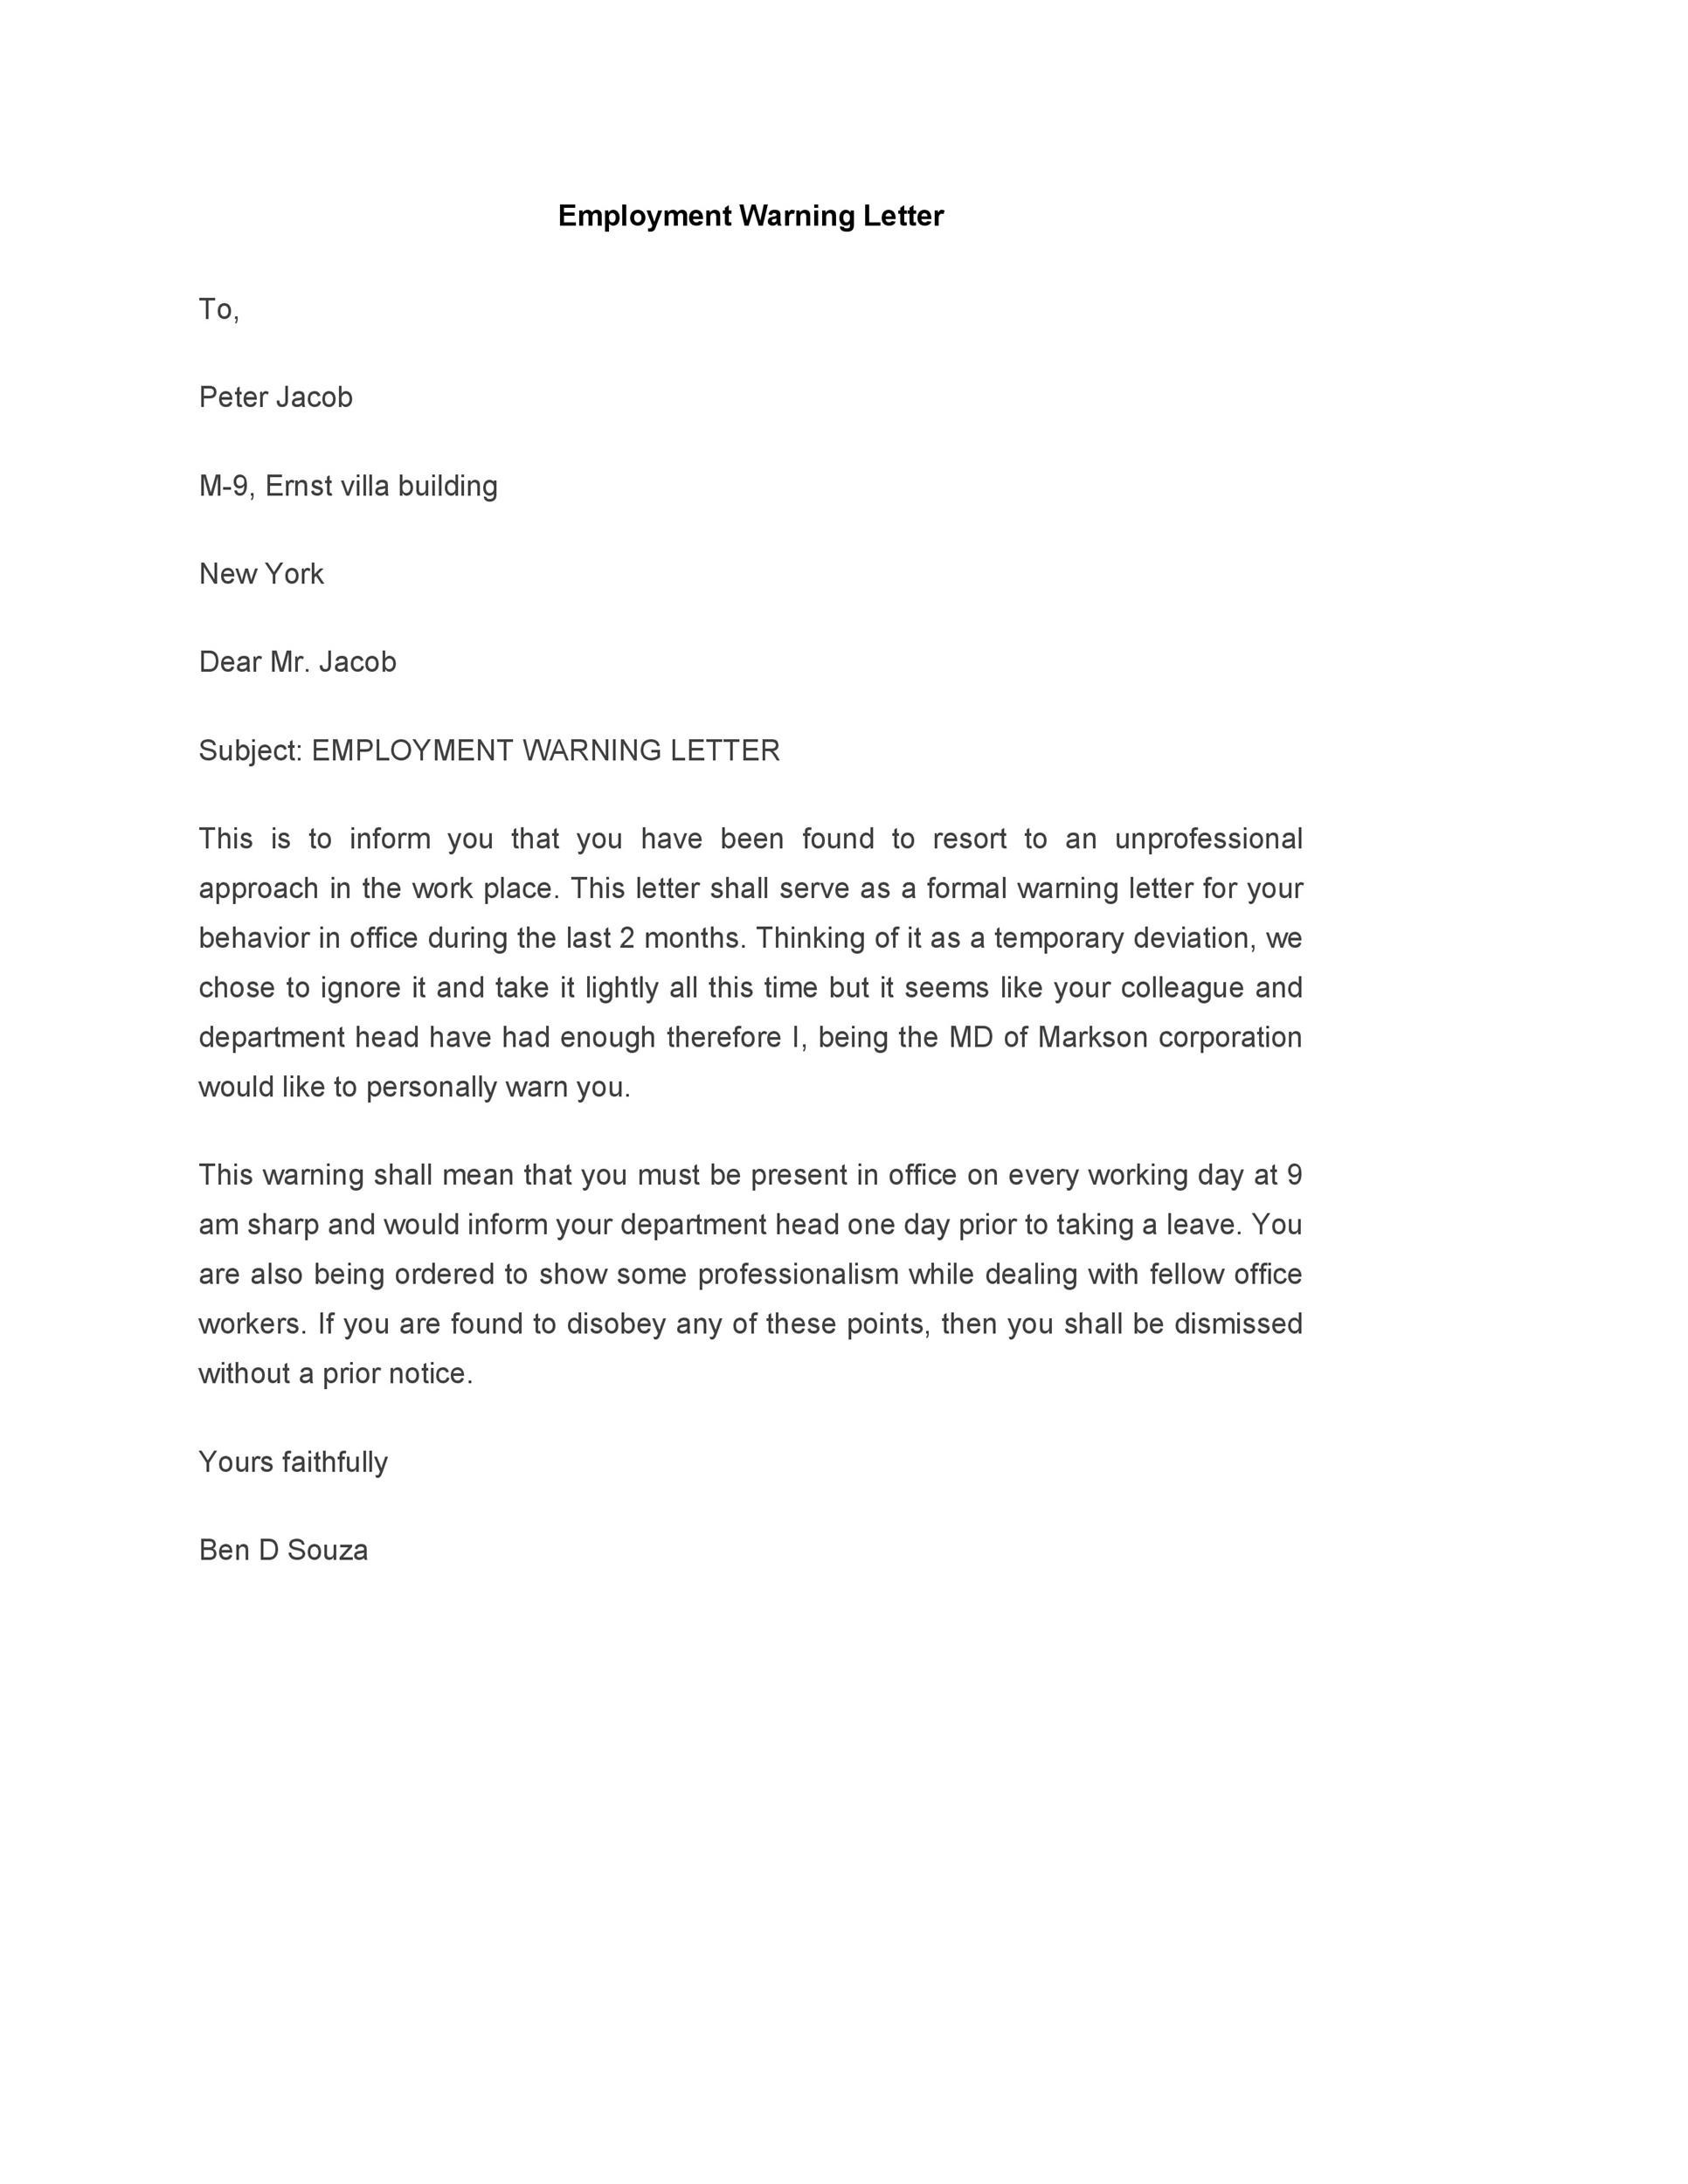 Company Warning Letter To Employee miraledesign